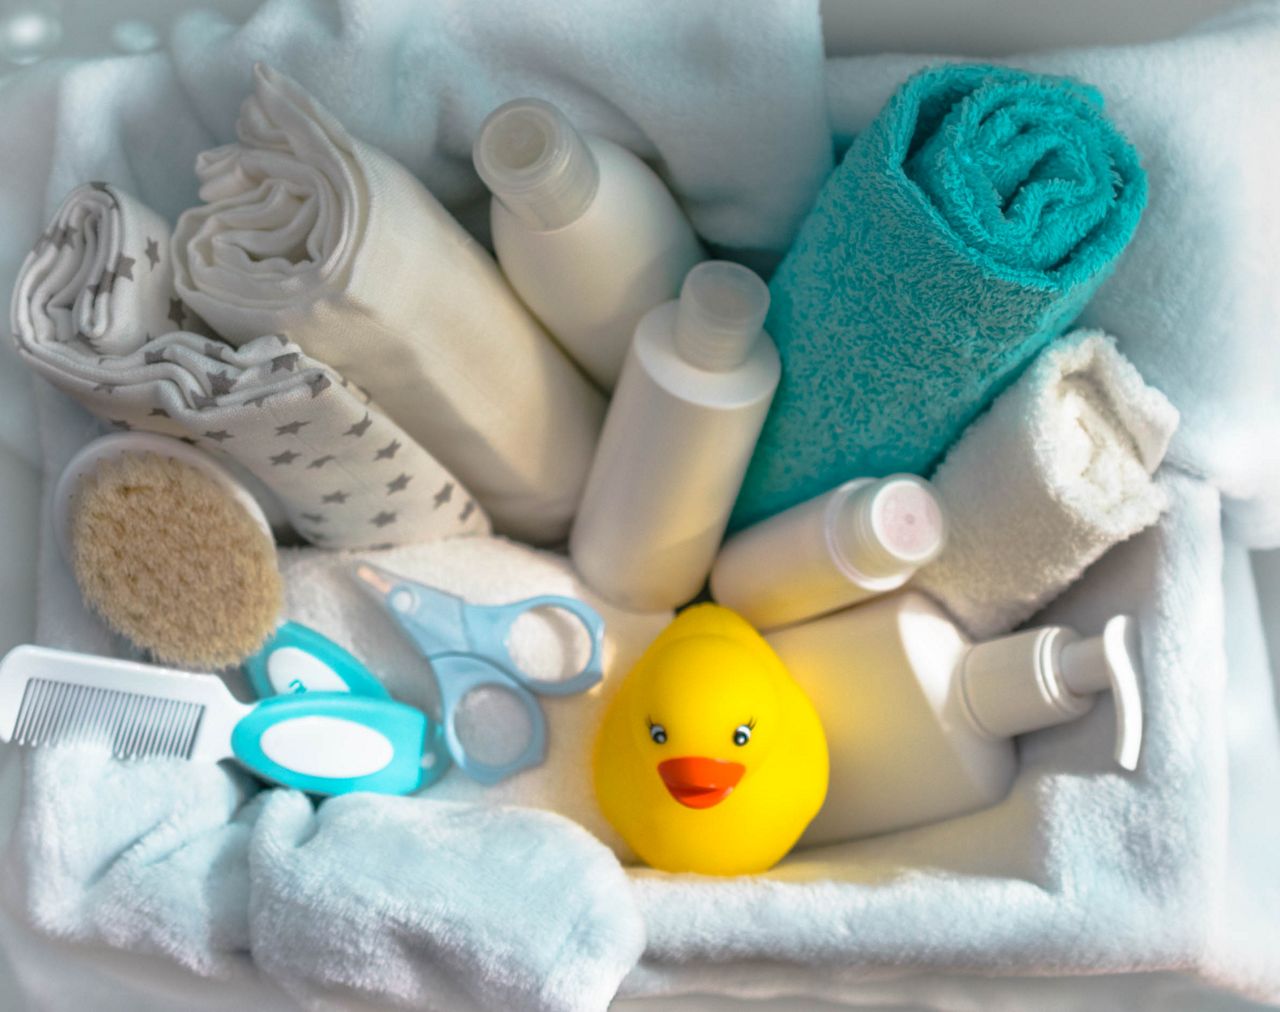 Baby accessories for bathing and hygiene with rubber duck